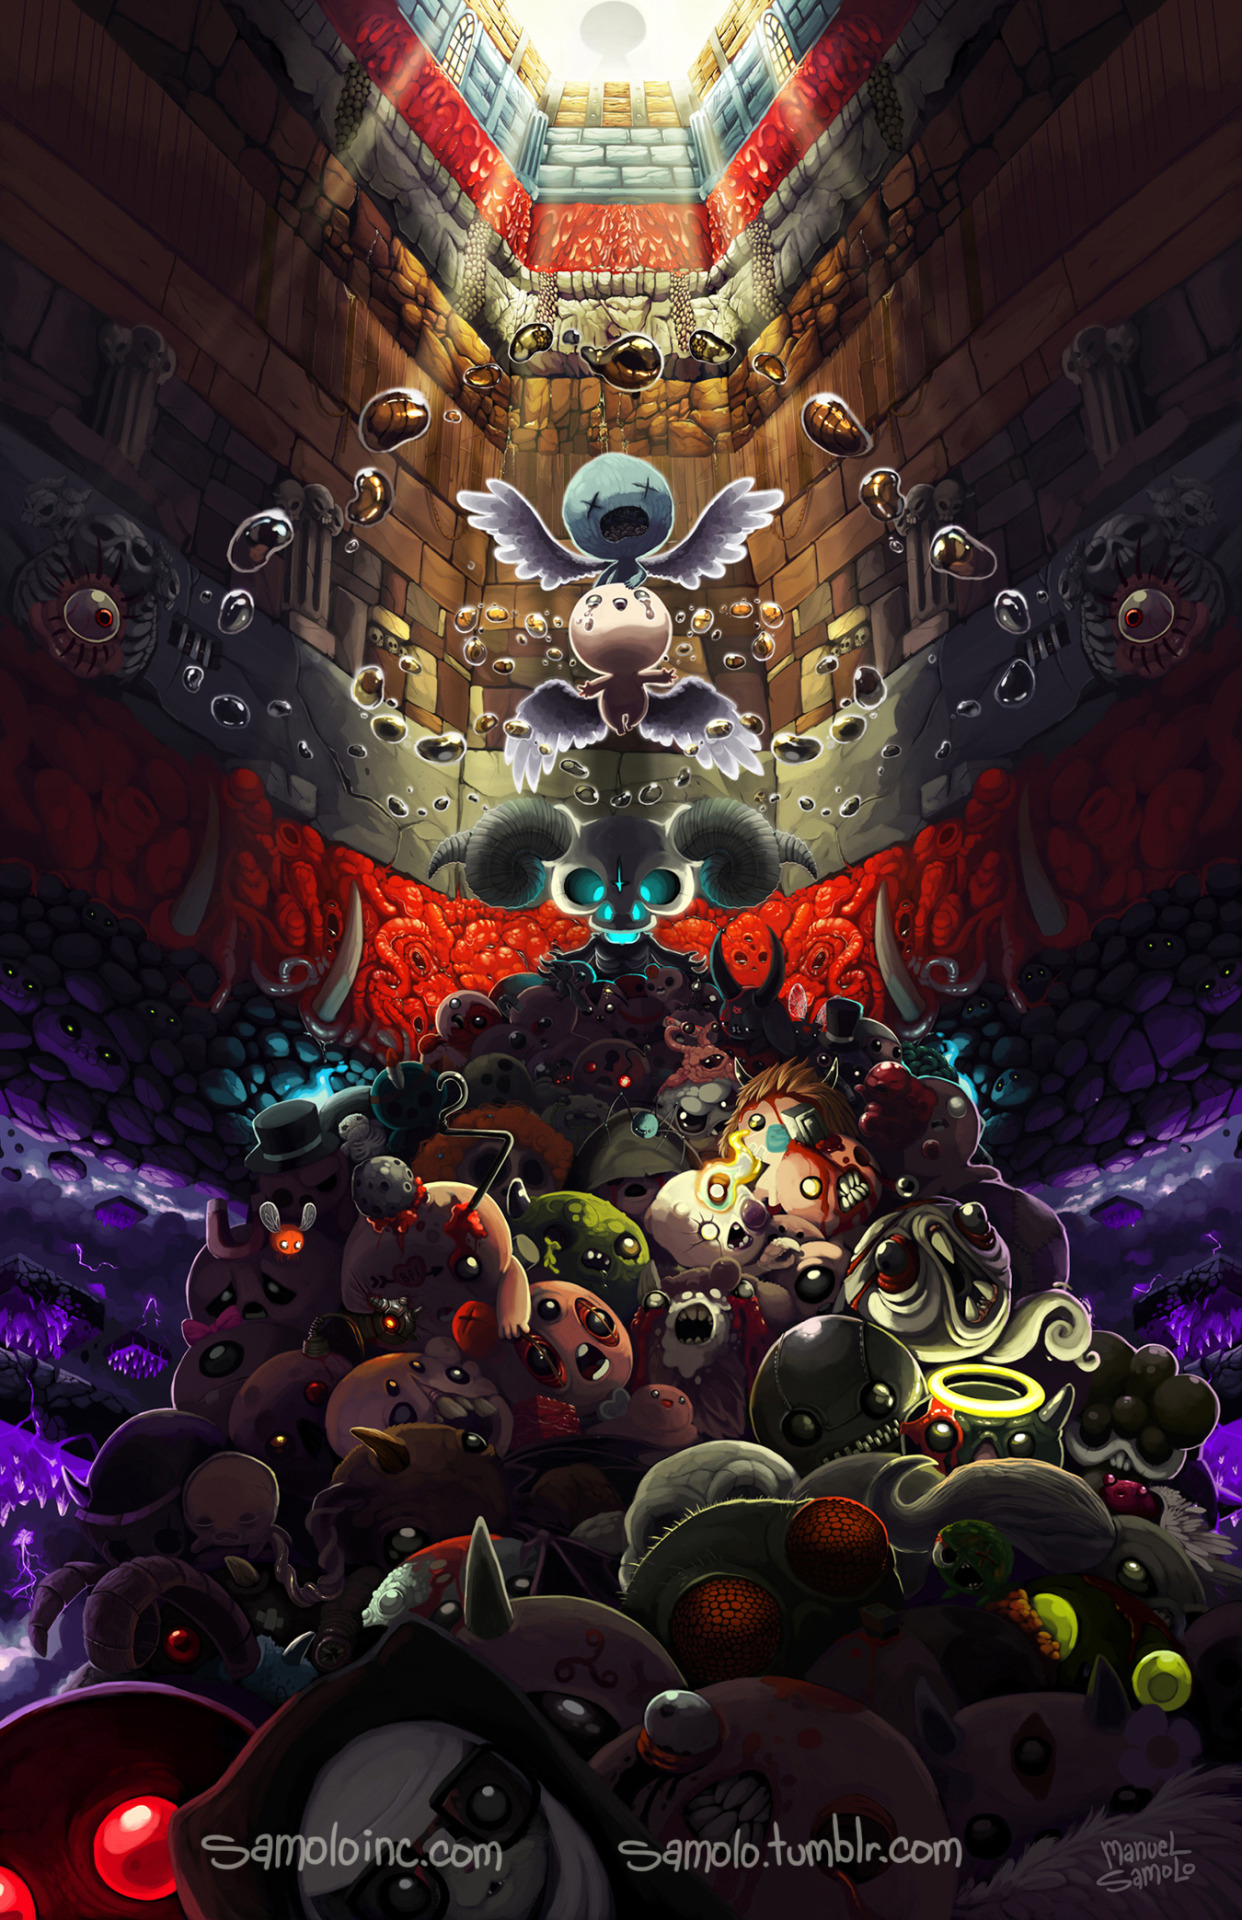 Post your Binding Of Isaac Wallpapers... I've been looking for a new